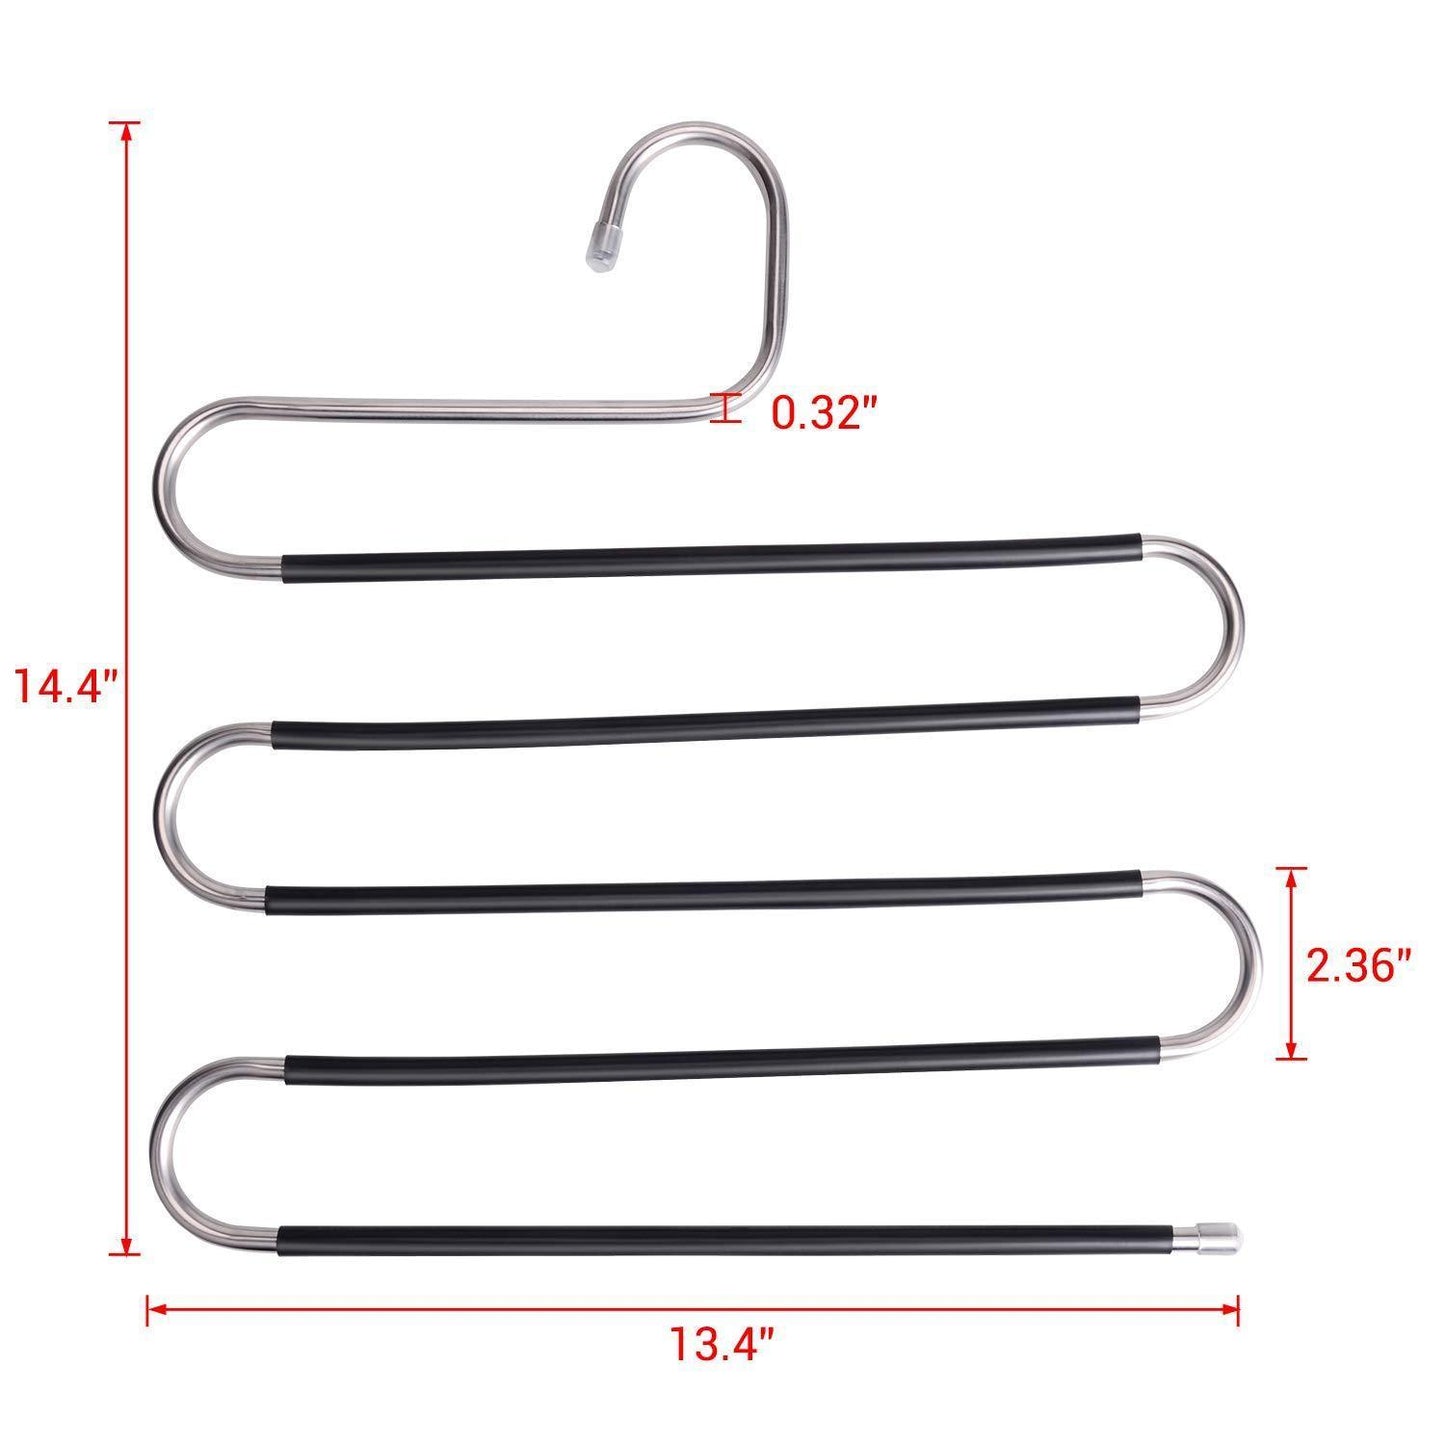 Discover the ieoke pant hangers durable slack hangers multi layers stainless steel space saving clothes hangers closet storage for jeans trousers 4 pack